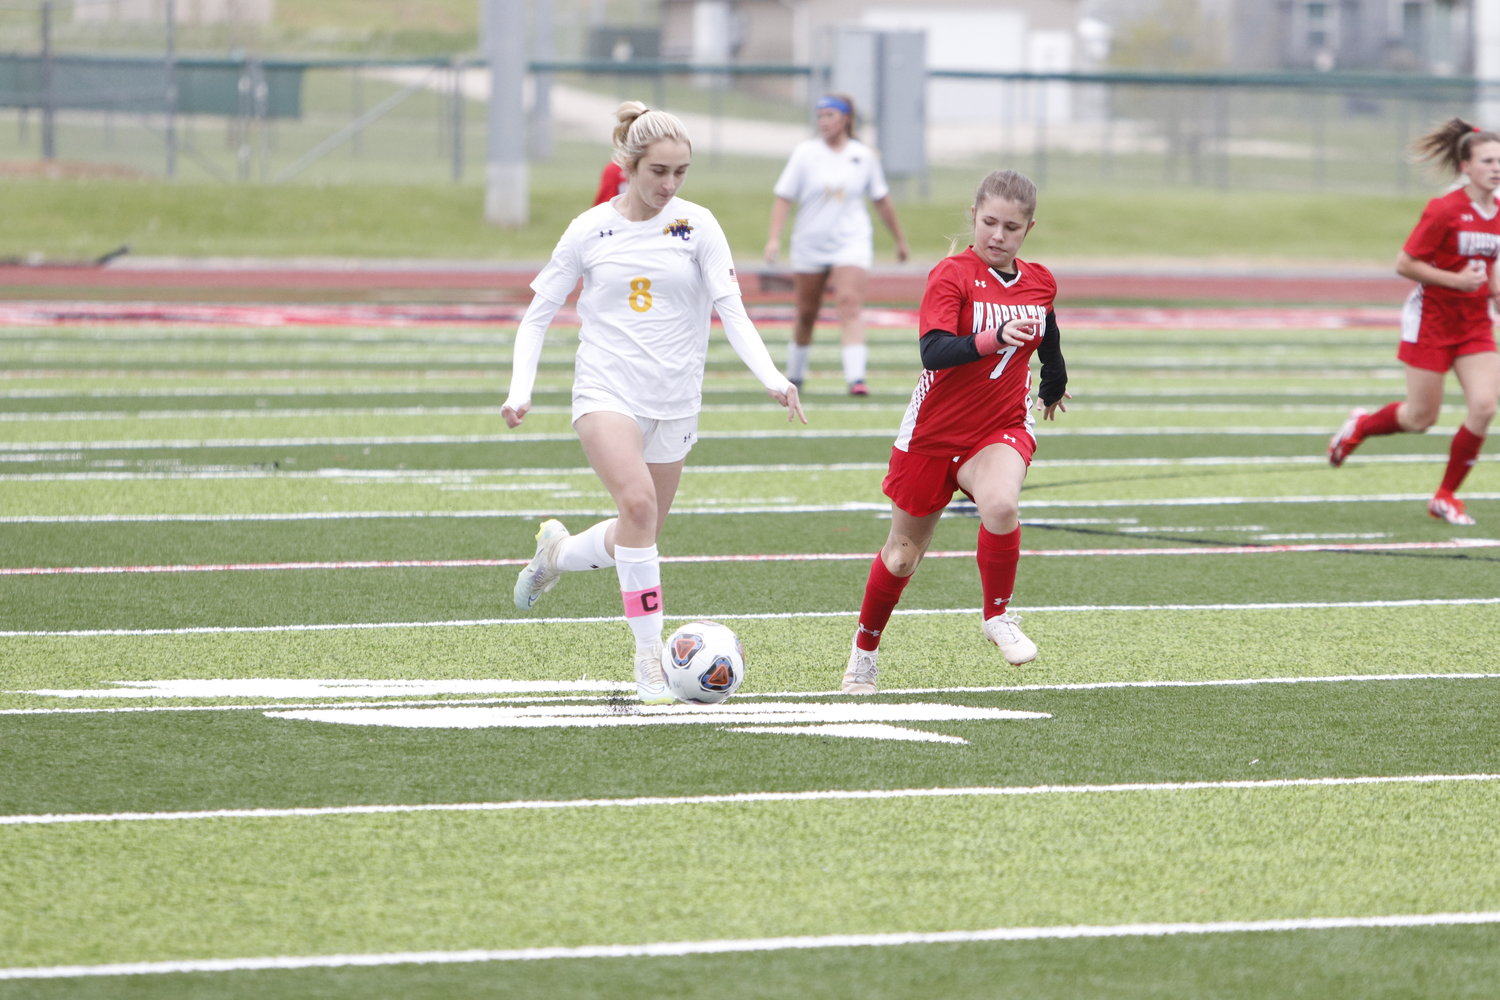 Alex Sutter (left) attempts to move the ball towards the goal in the first half of last week’s game as Ashlynn Reeves trails the play.